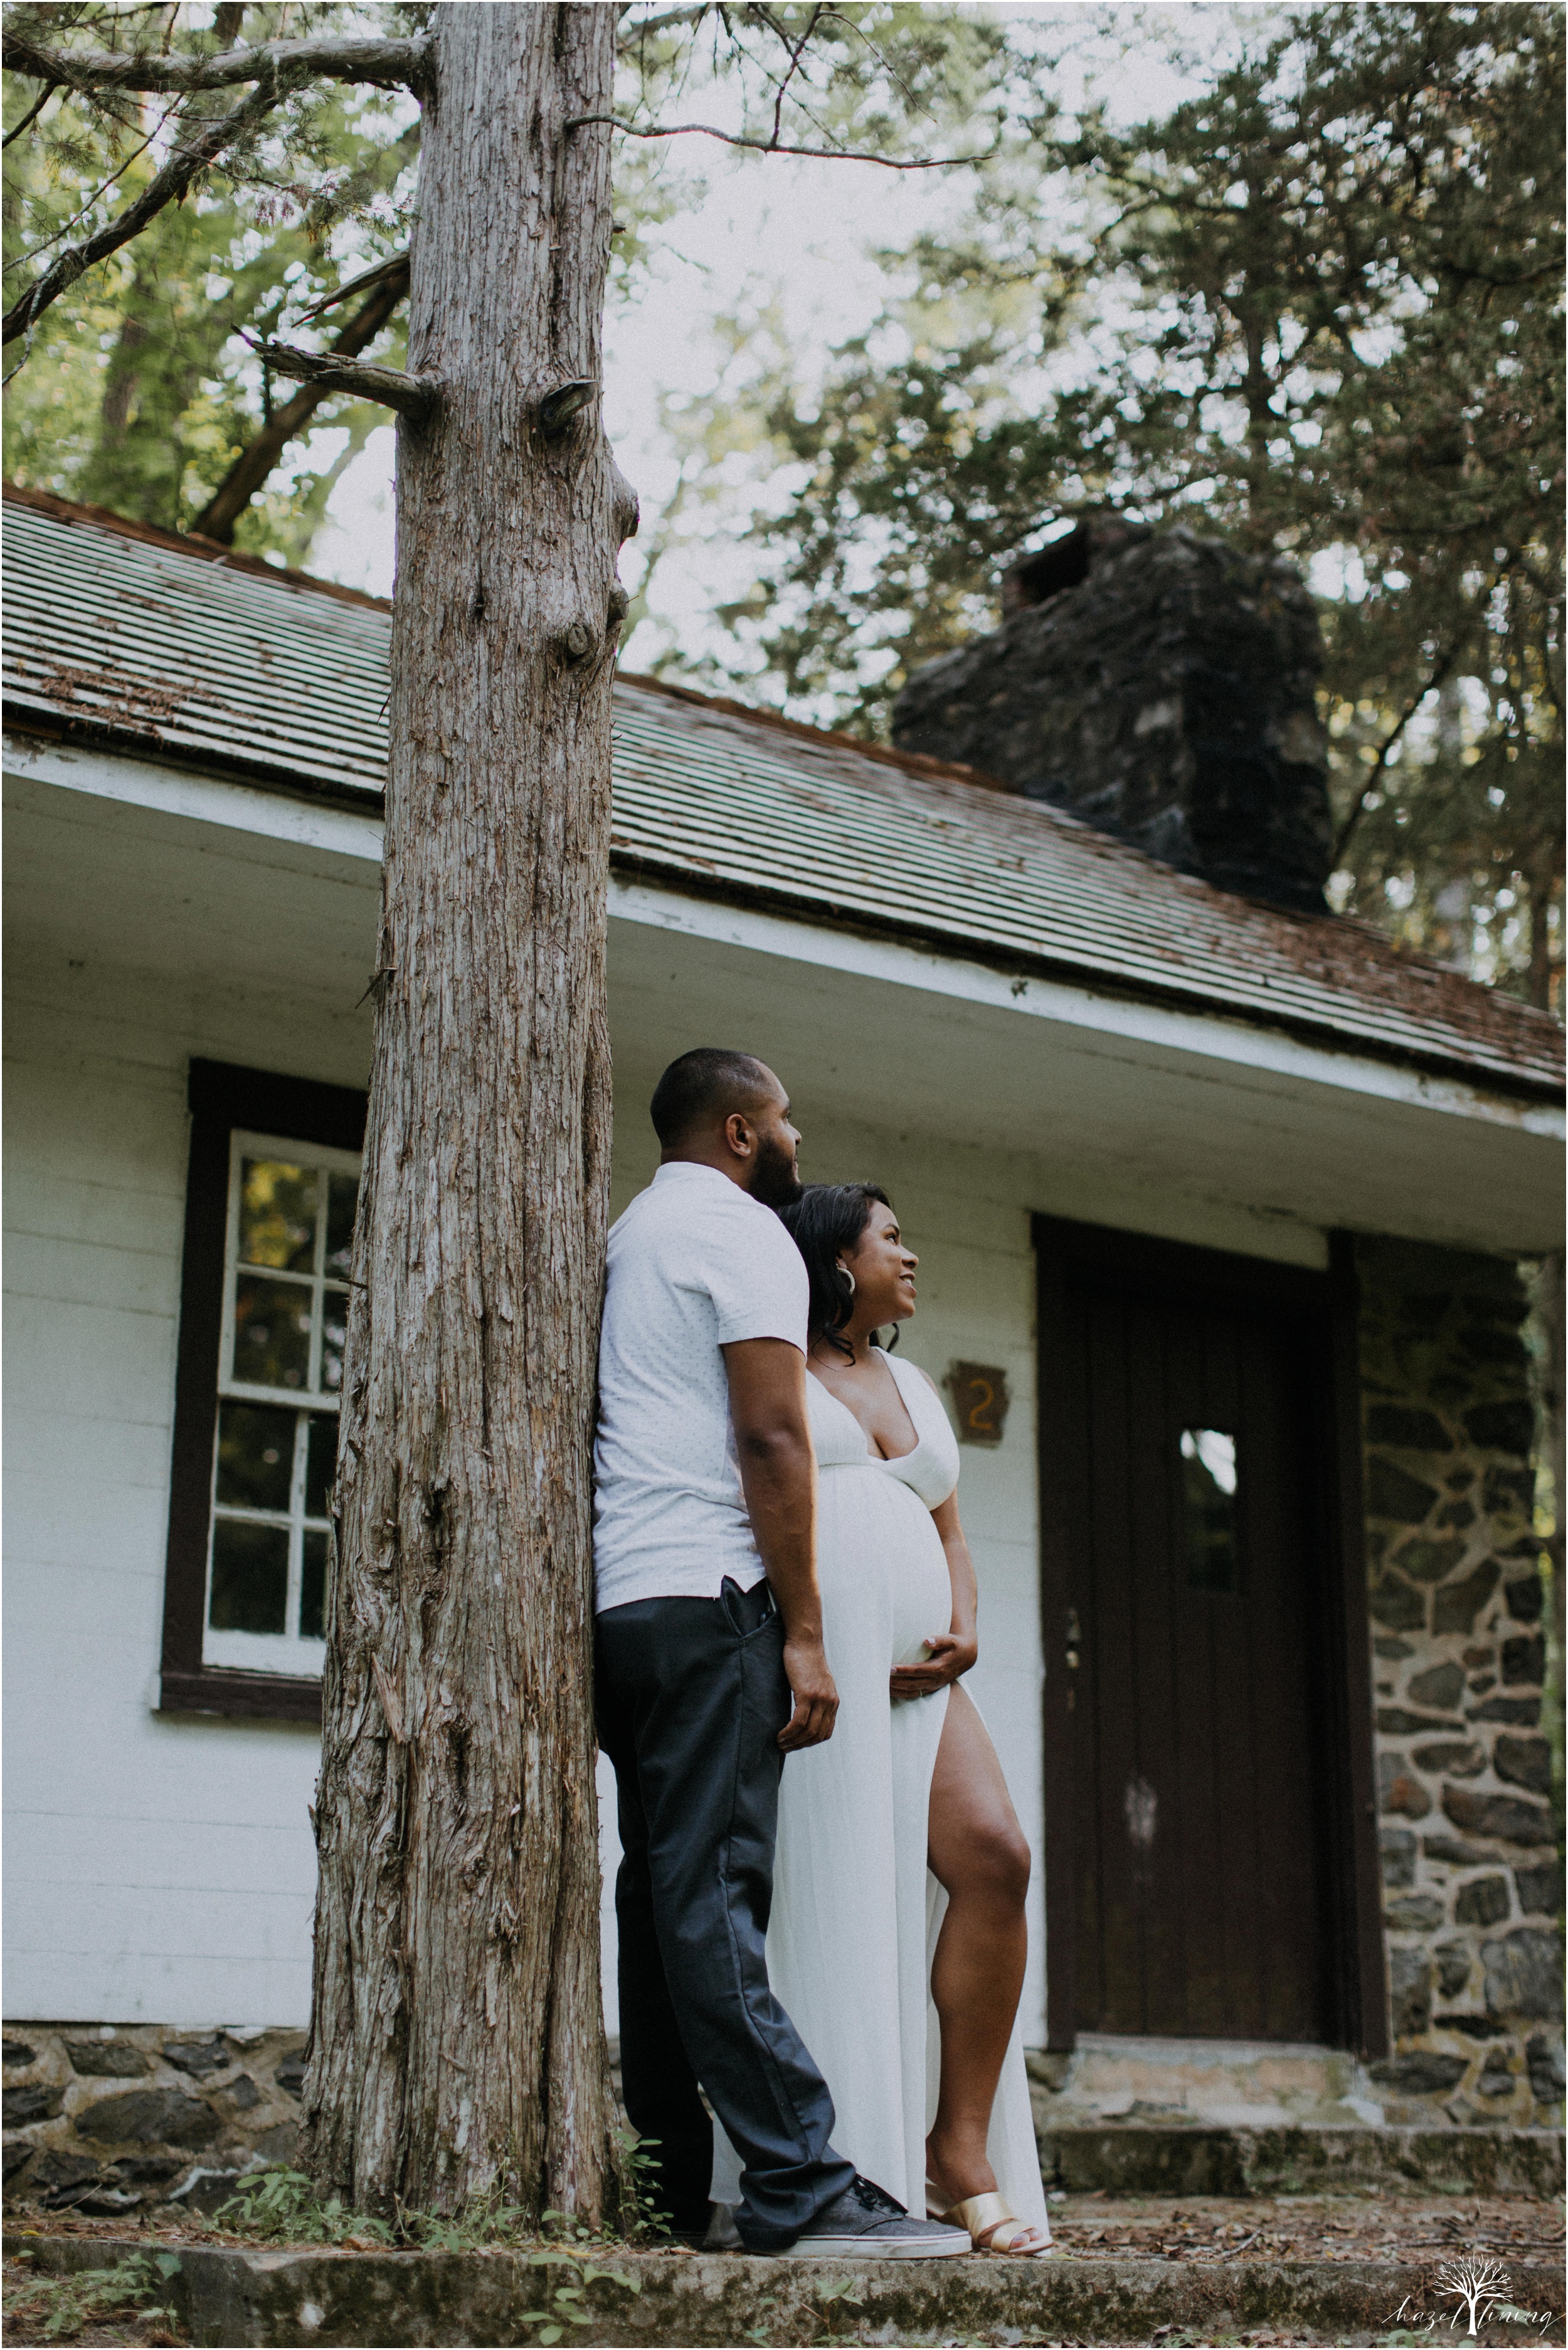 hazel-lining-photography-destination--elopement-wedding-engagement-photography-year-in-review_0010.jpg